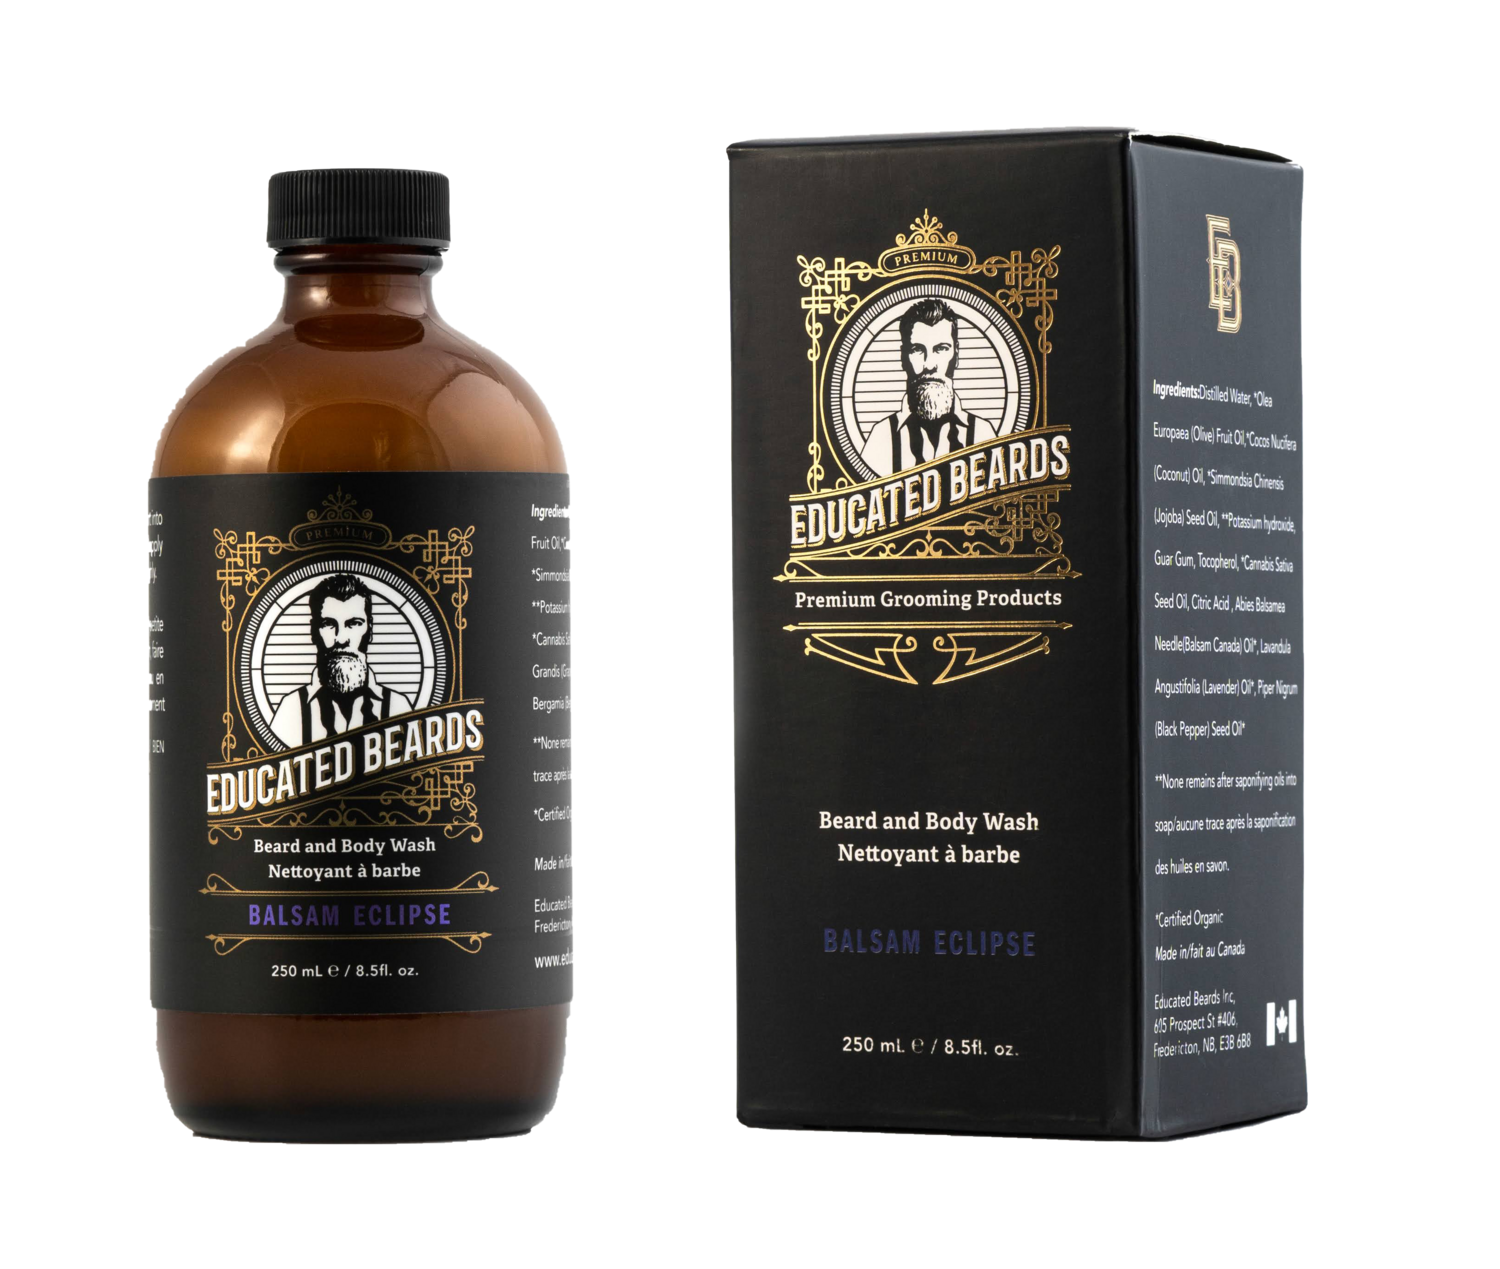 Balsam Eclipse Beard and Body Wash- Educated Beards